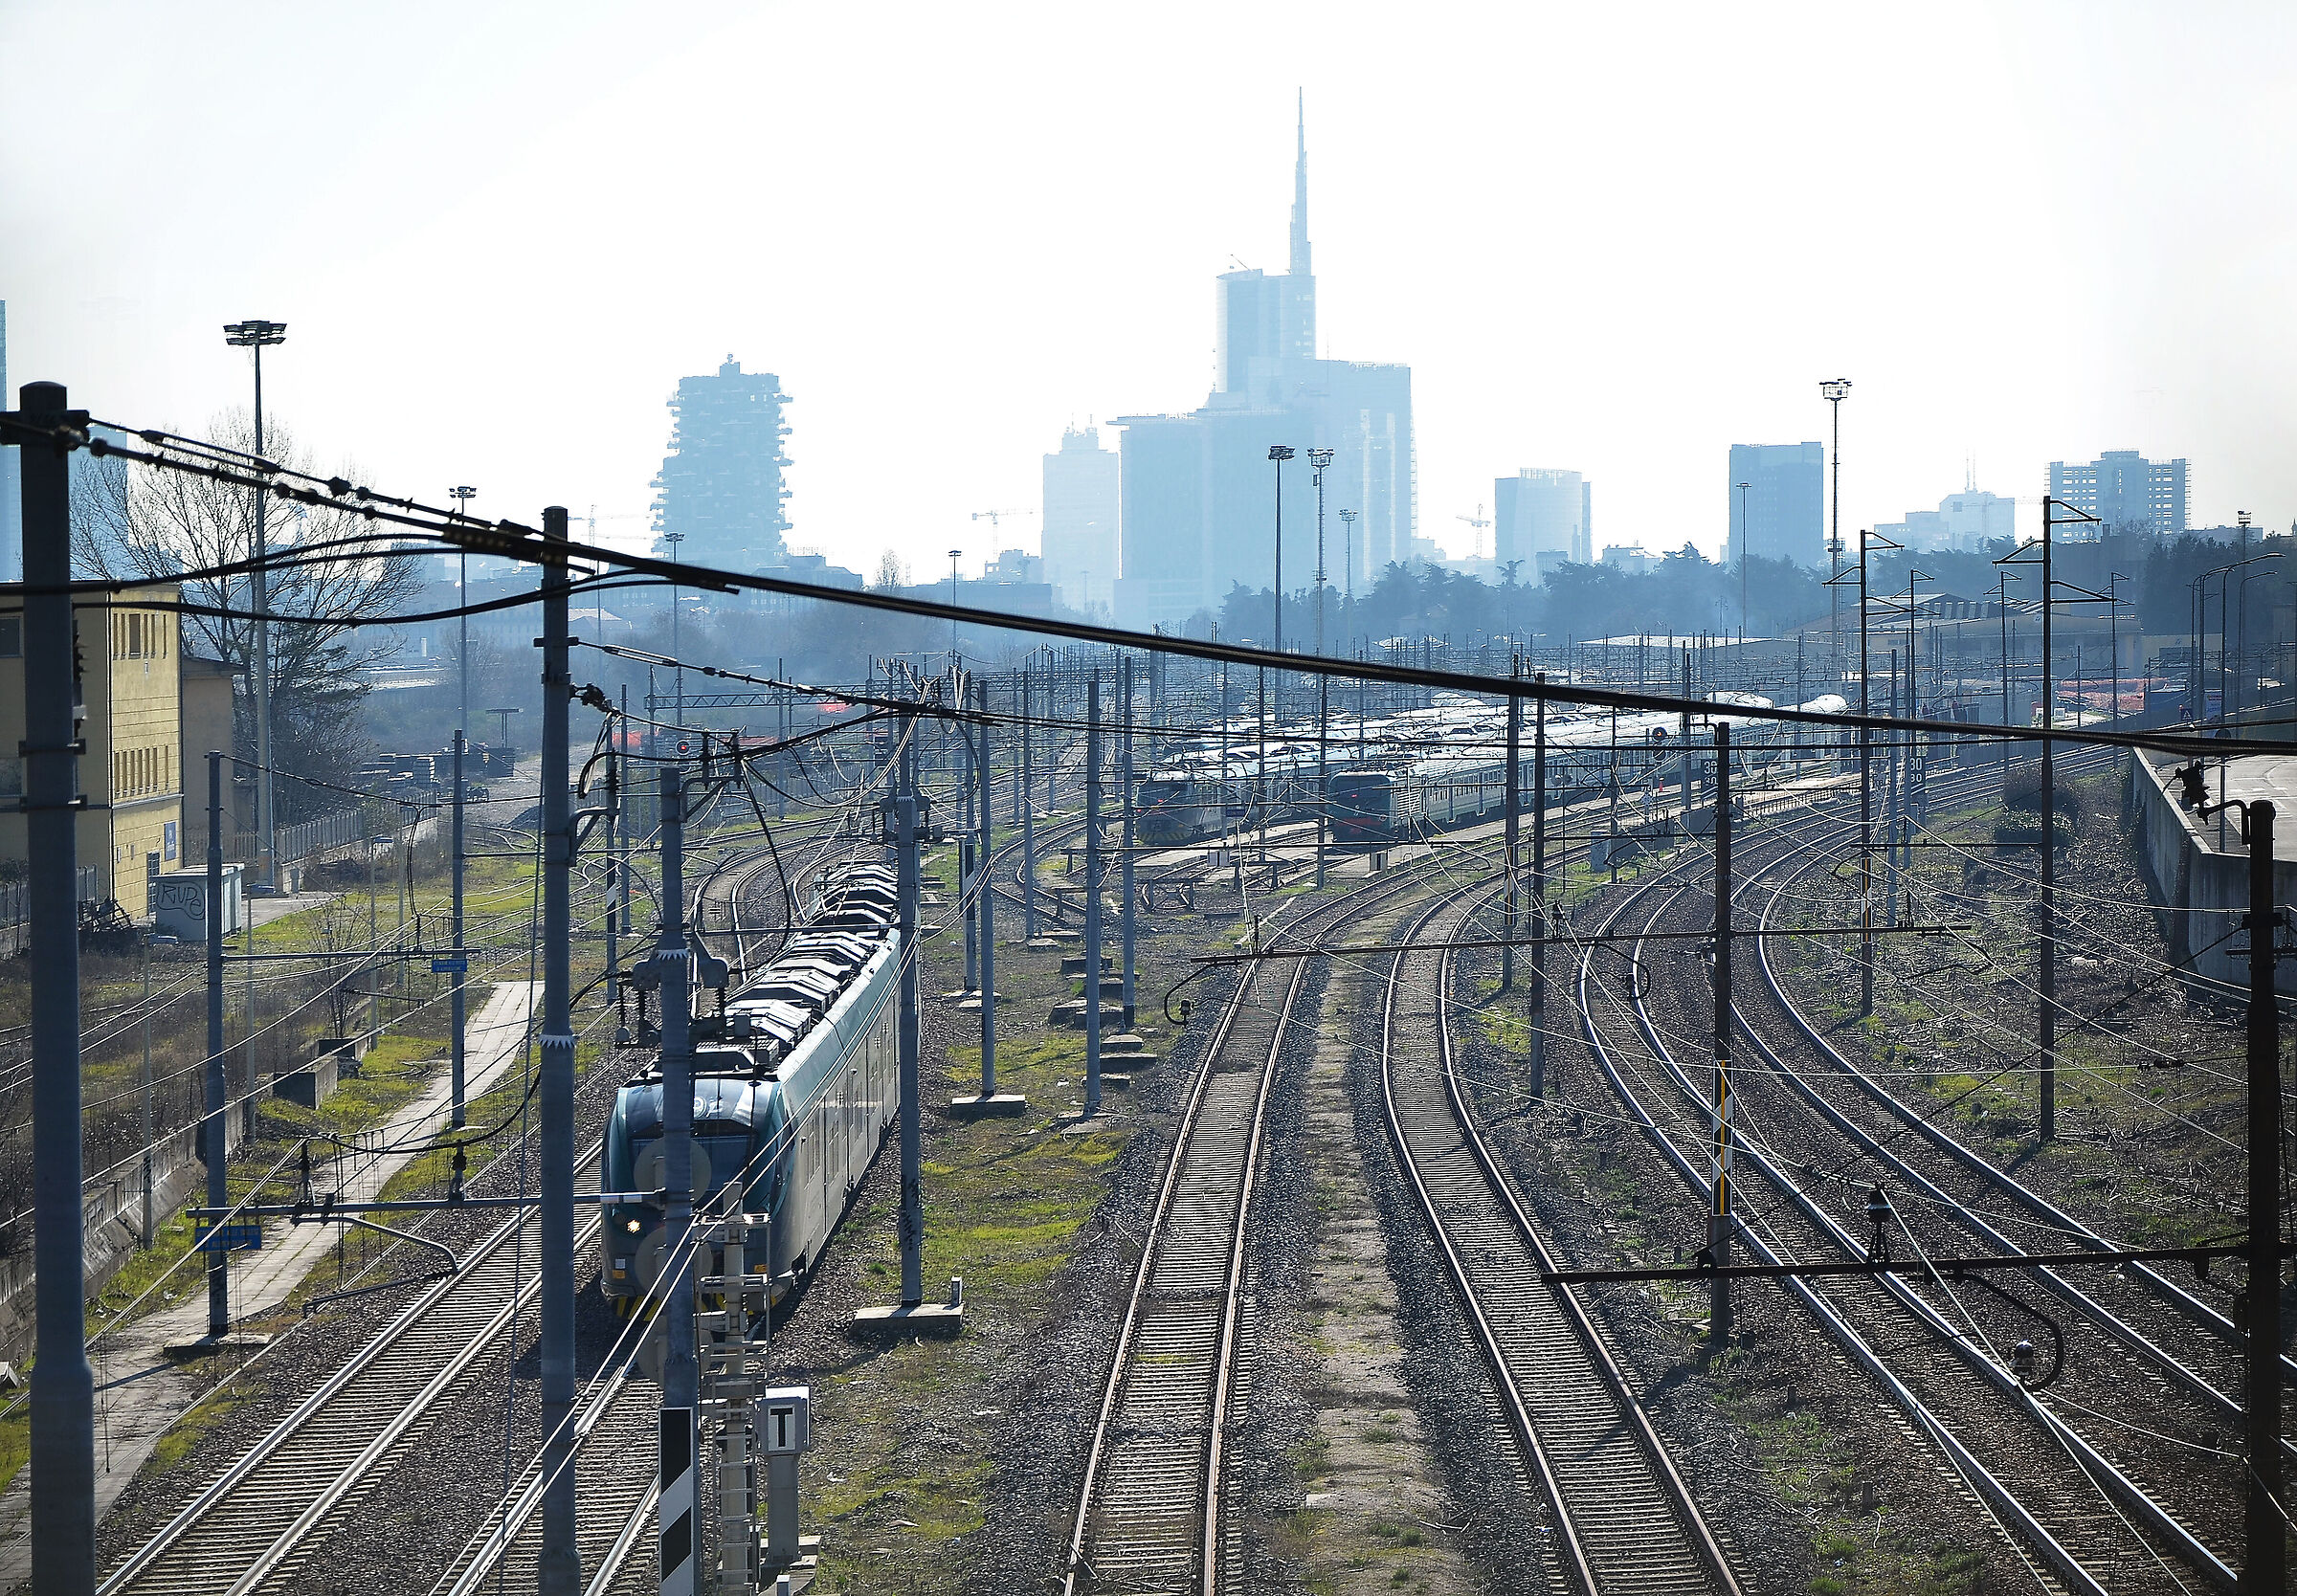 poles, cable, rails .. and then Milan...